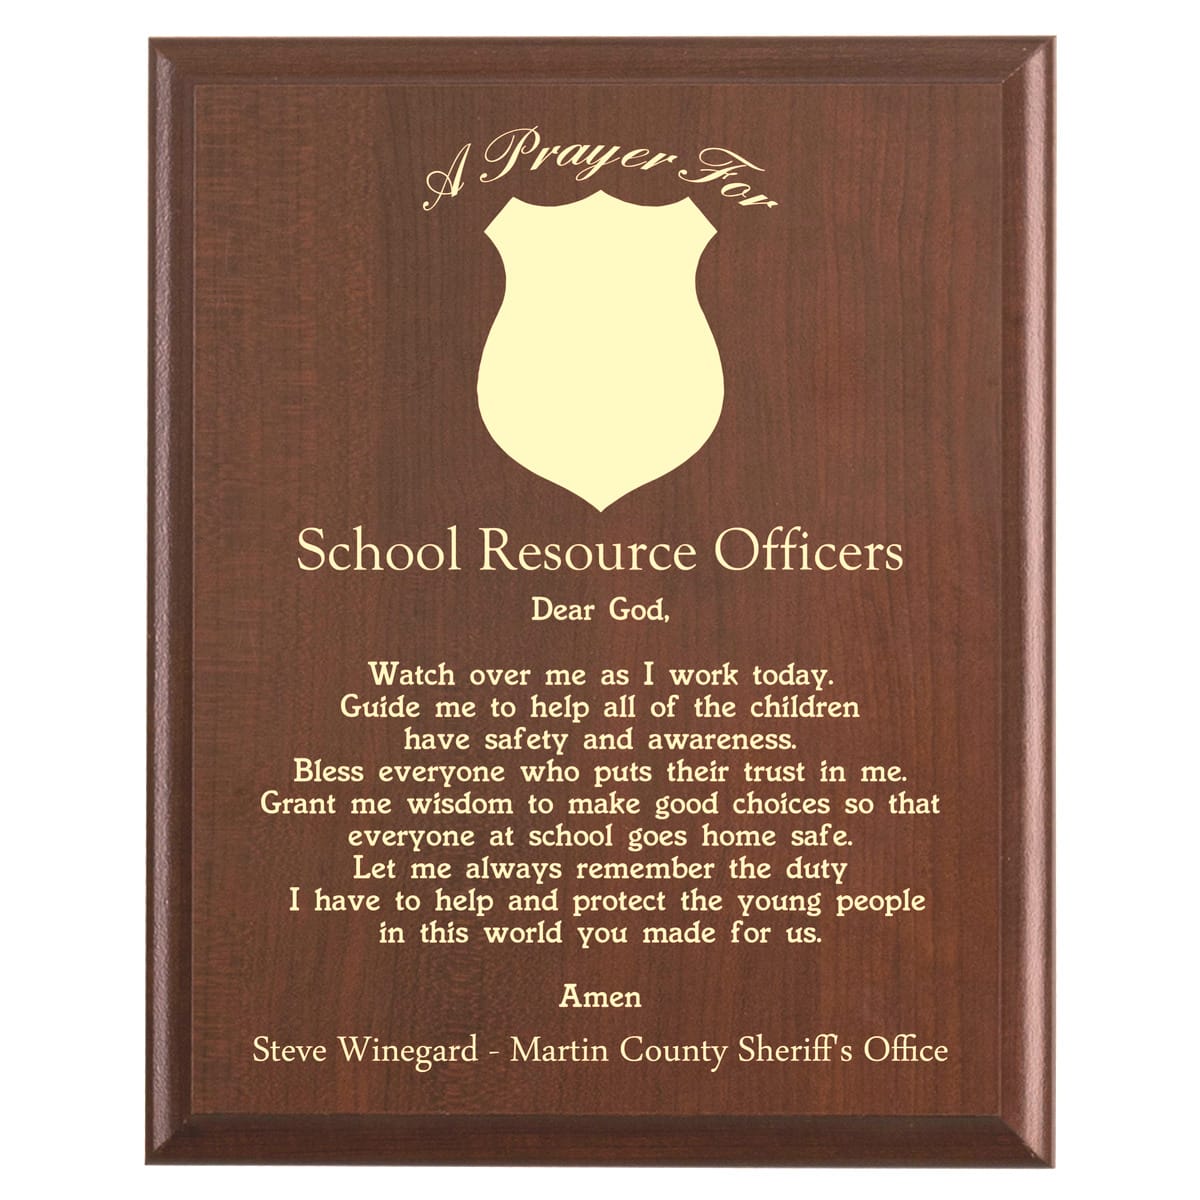 Plaque photo: School Resource Officer Prayer Plaque design with free personalization. Wood style finish with customized text.